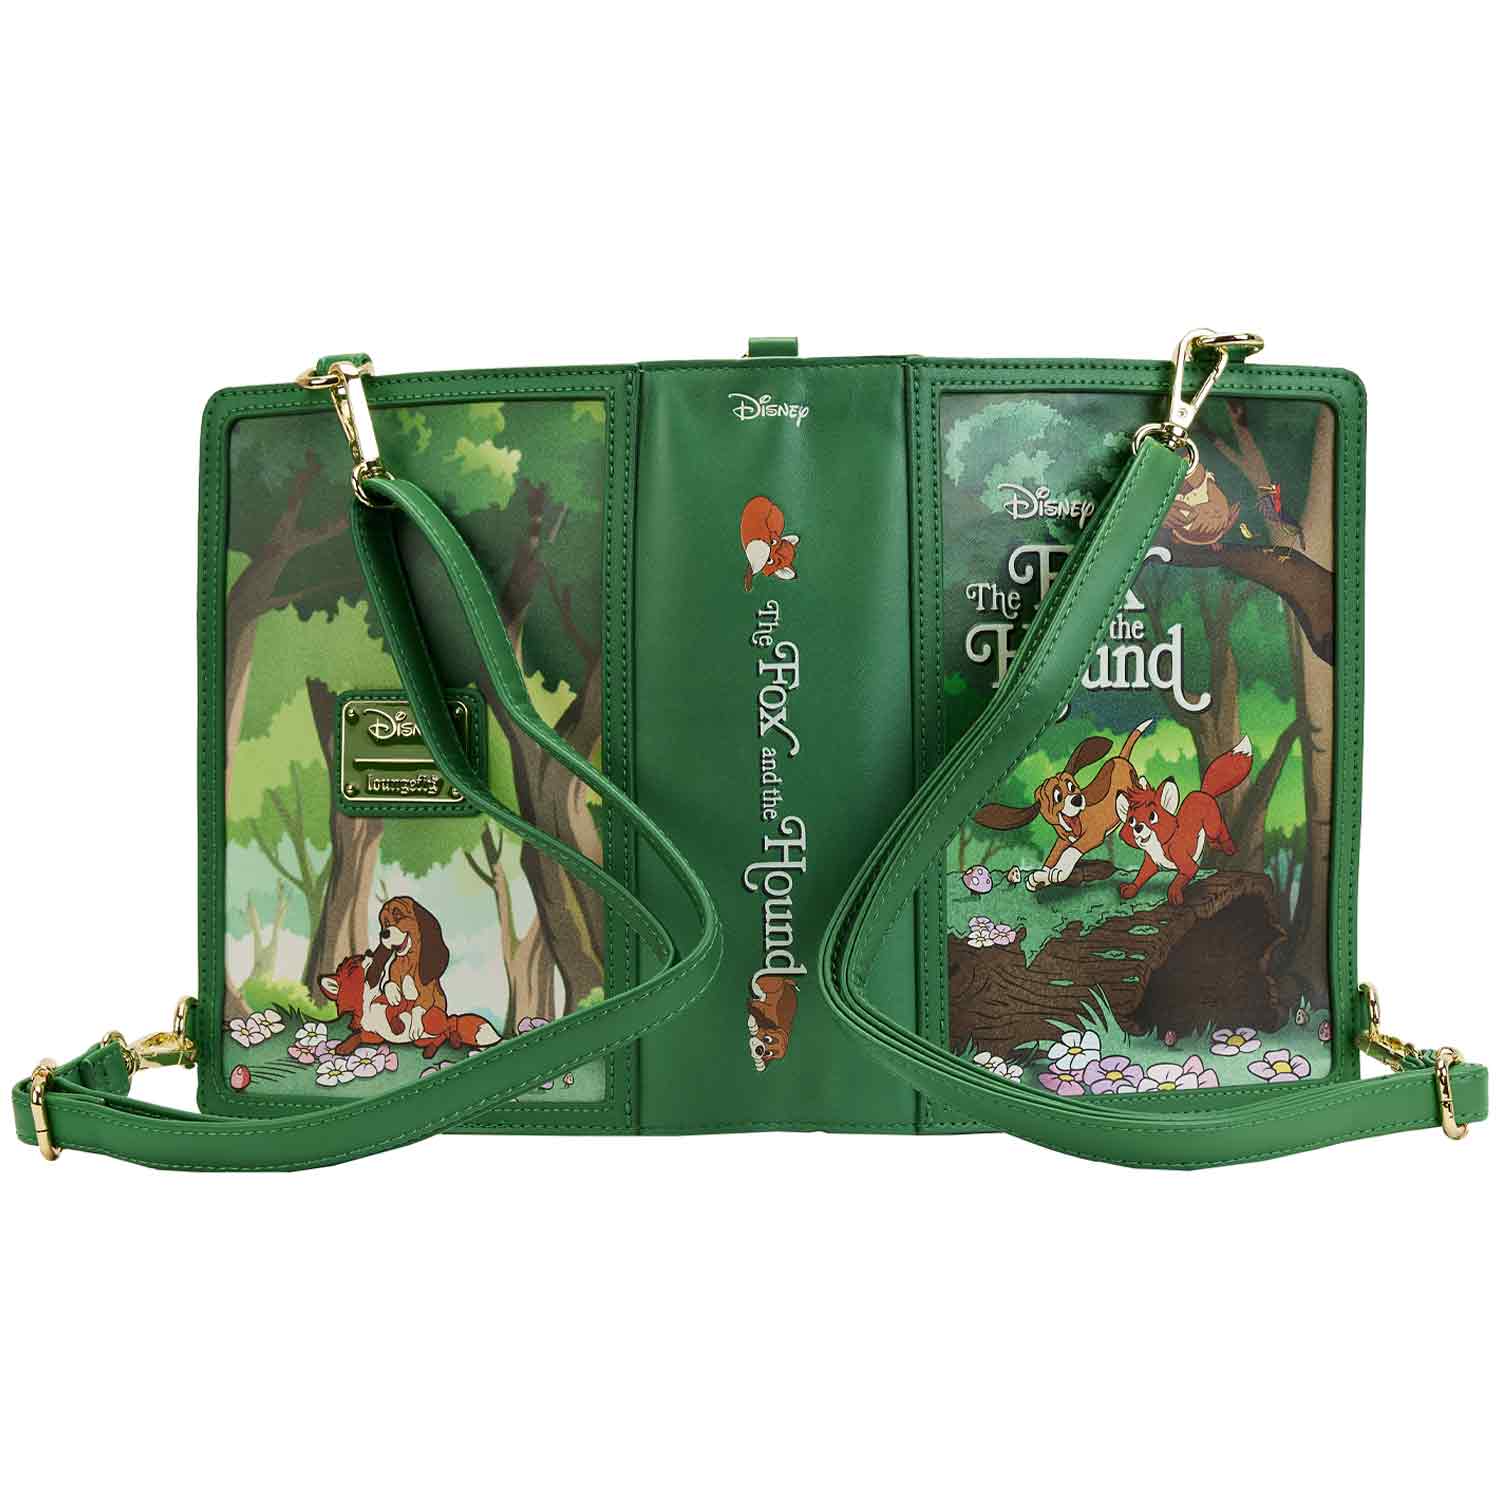 Loungefly x Disney Book Series The Fox and The Hound Convertible Crossbody Bag